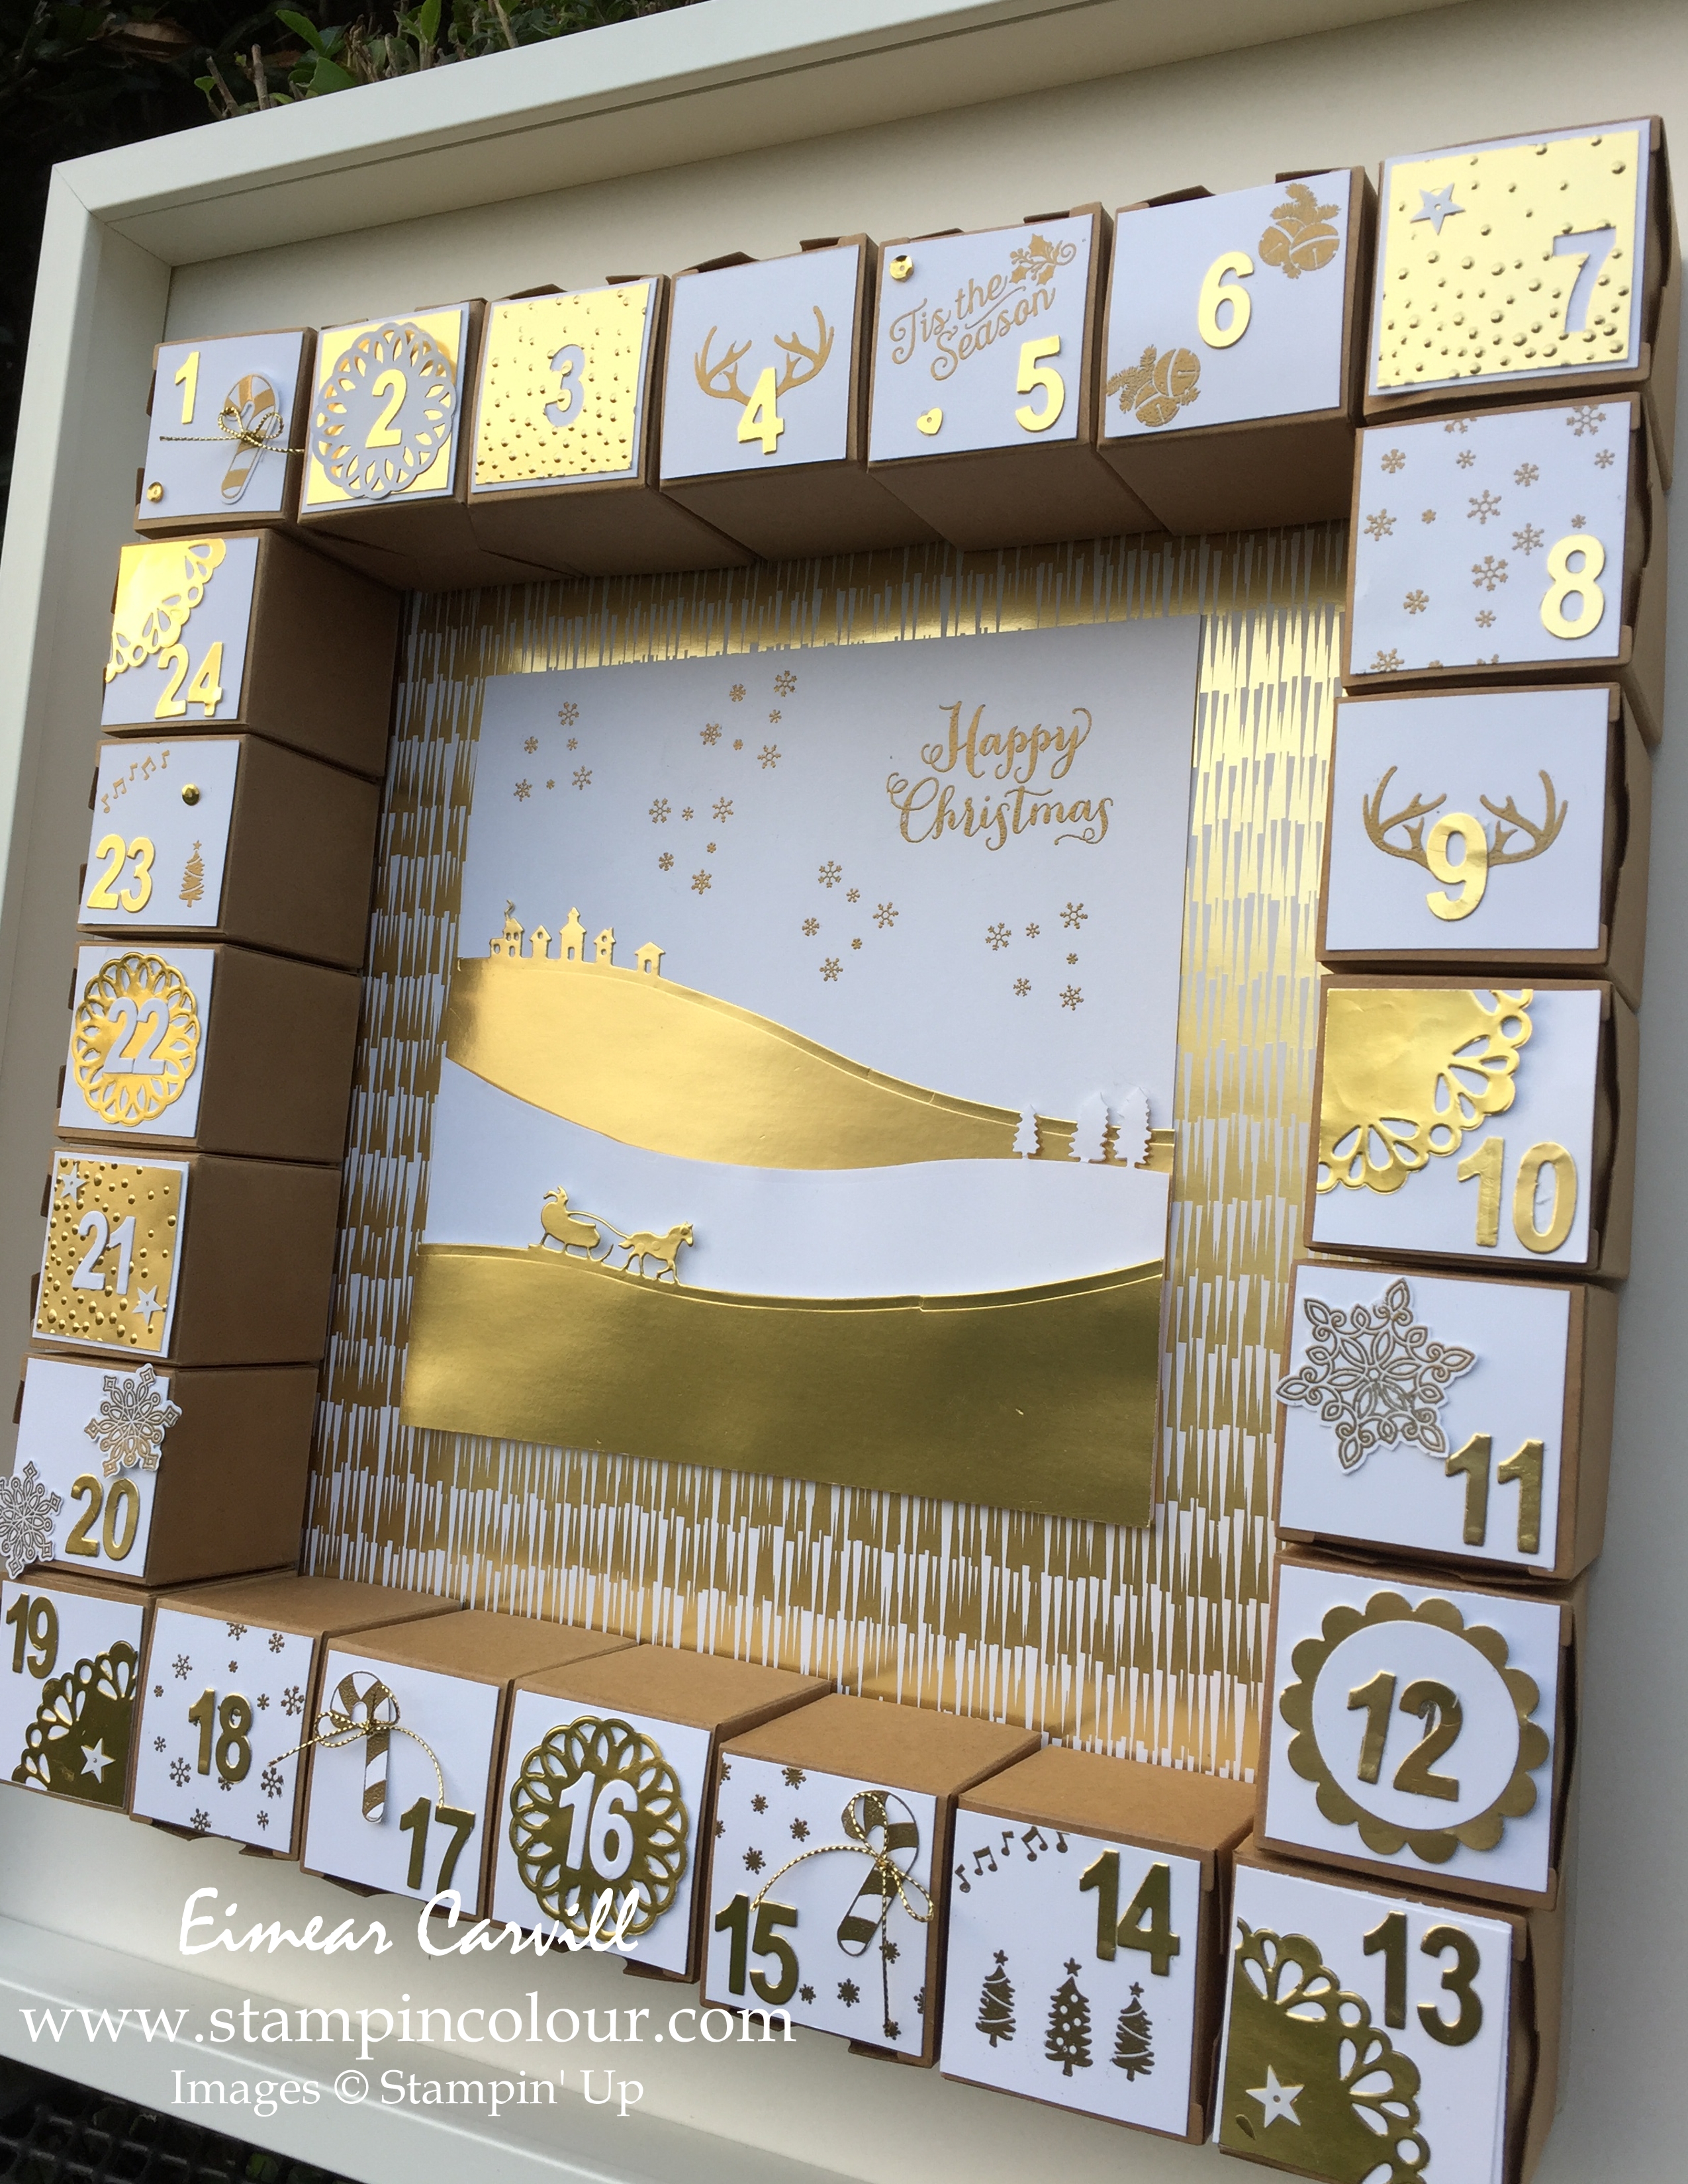 Stampin Up Advent Calendar in Gold and White